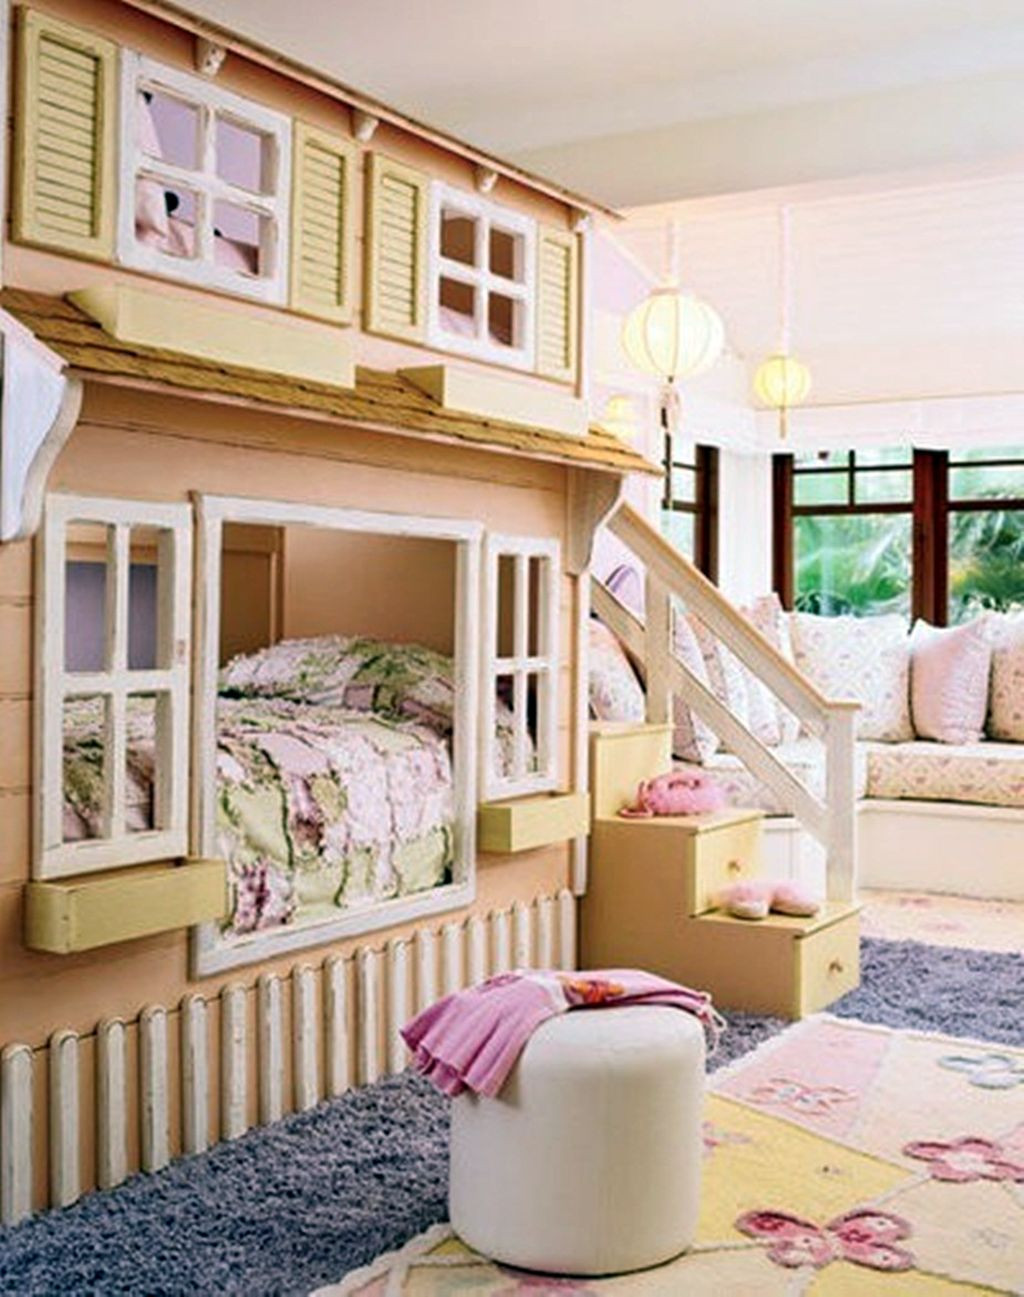 Bunk Bed Girl Bedroom Ideas
 19 Cute Girls Bedroom Ideas Which Are Fluffy Pinky and All